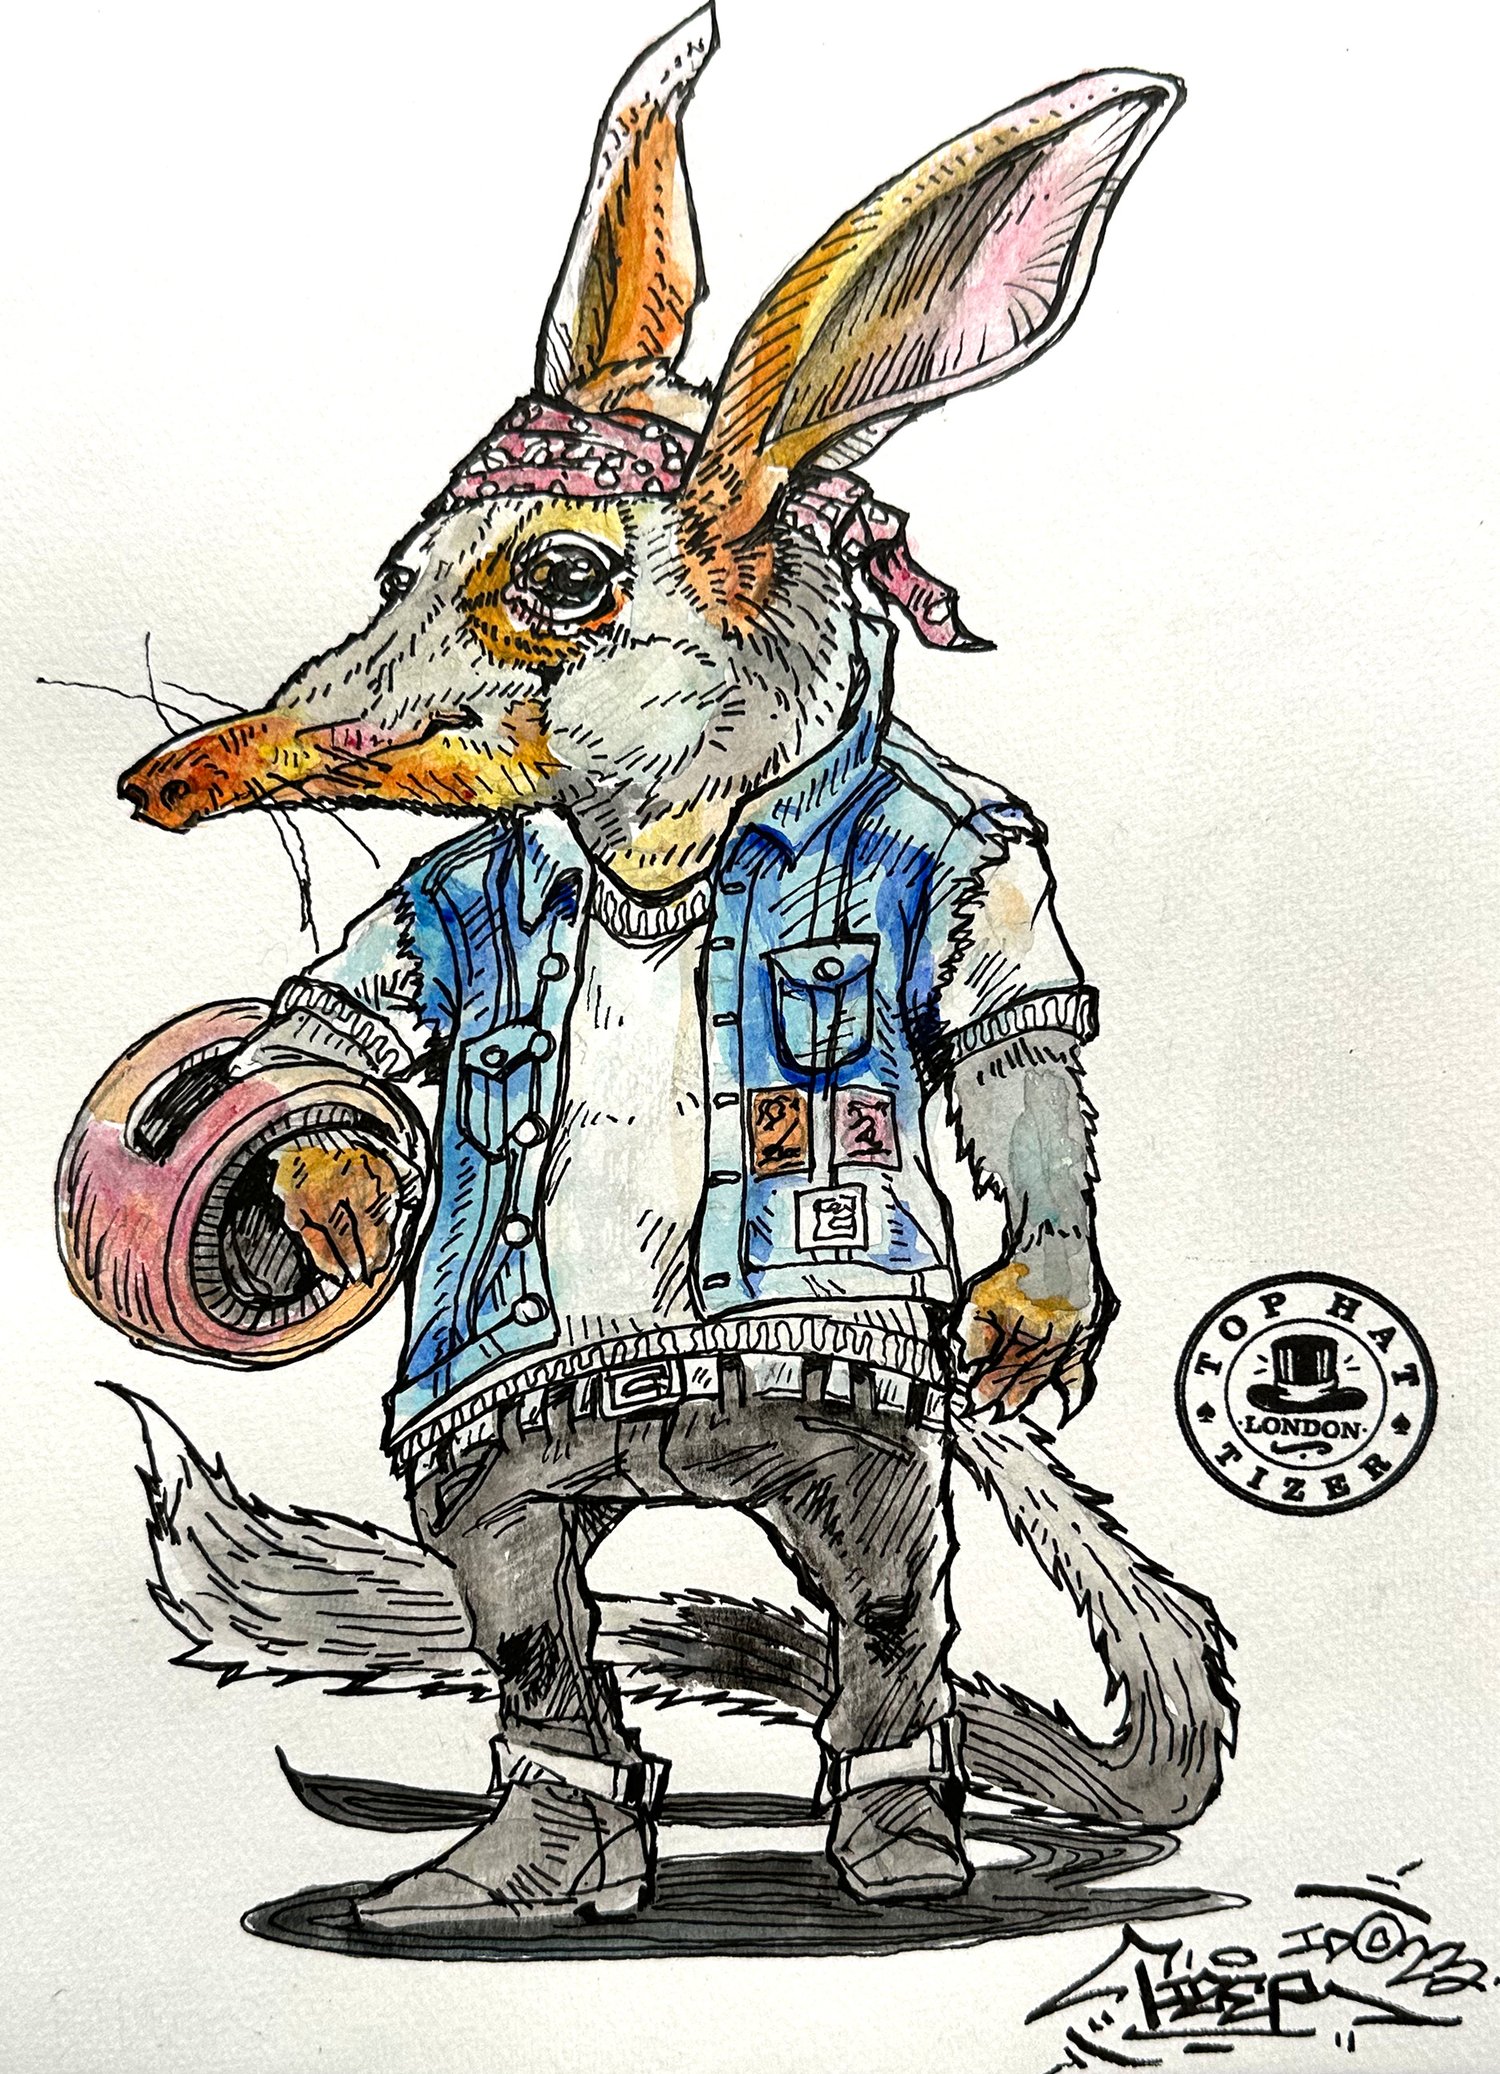 Image of 'BANDICOOT' by TIZER